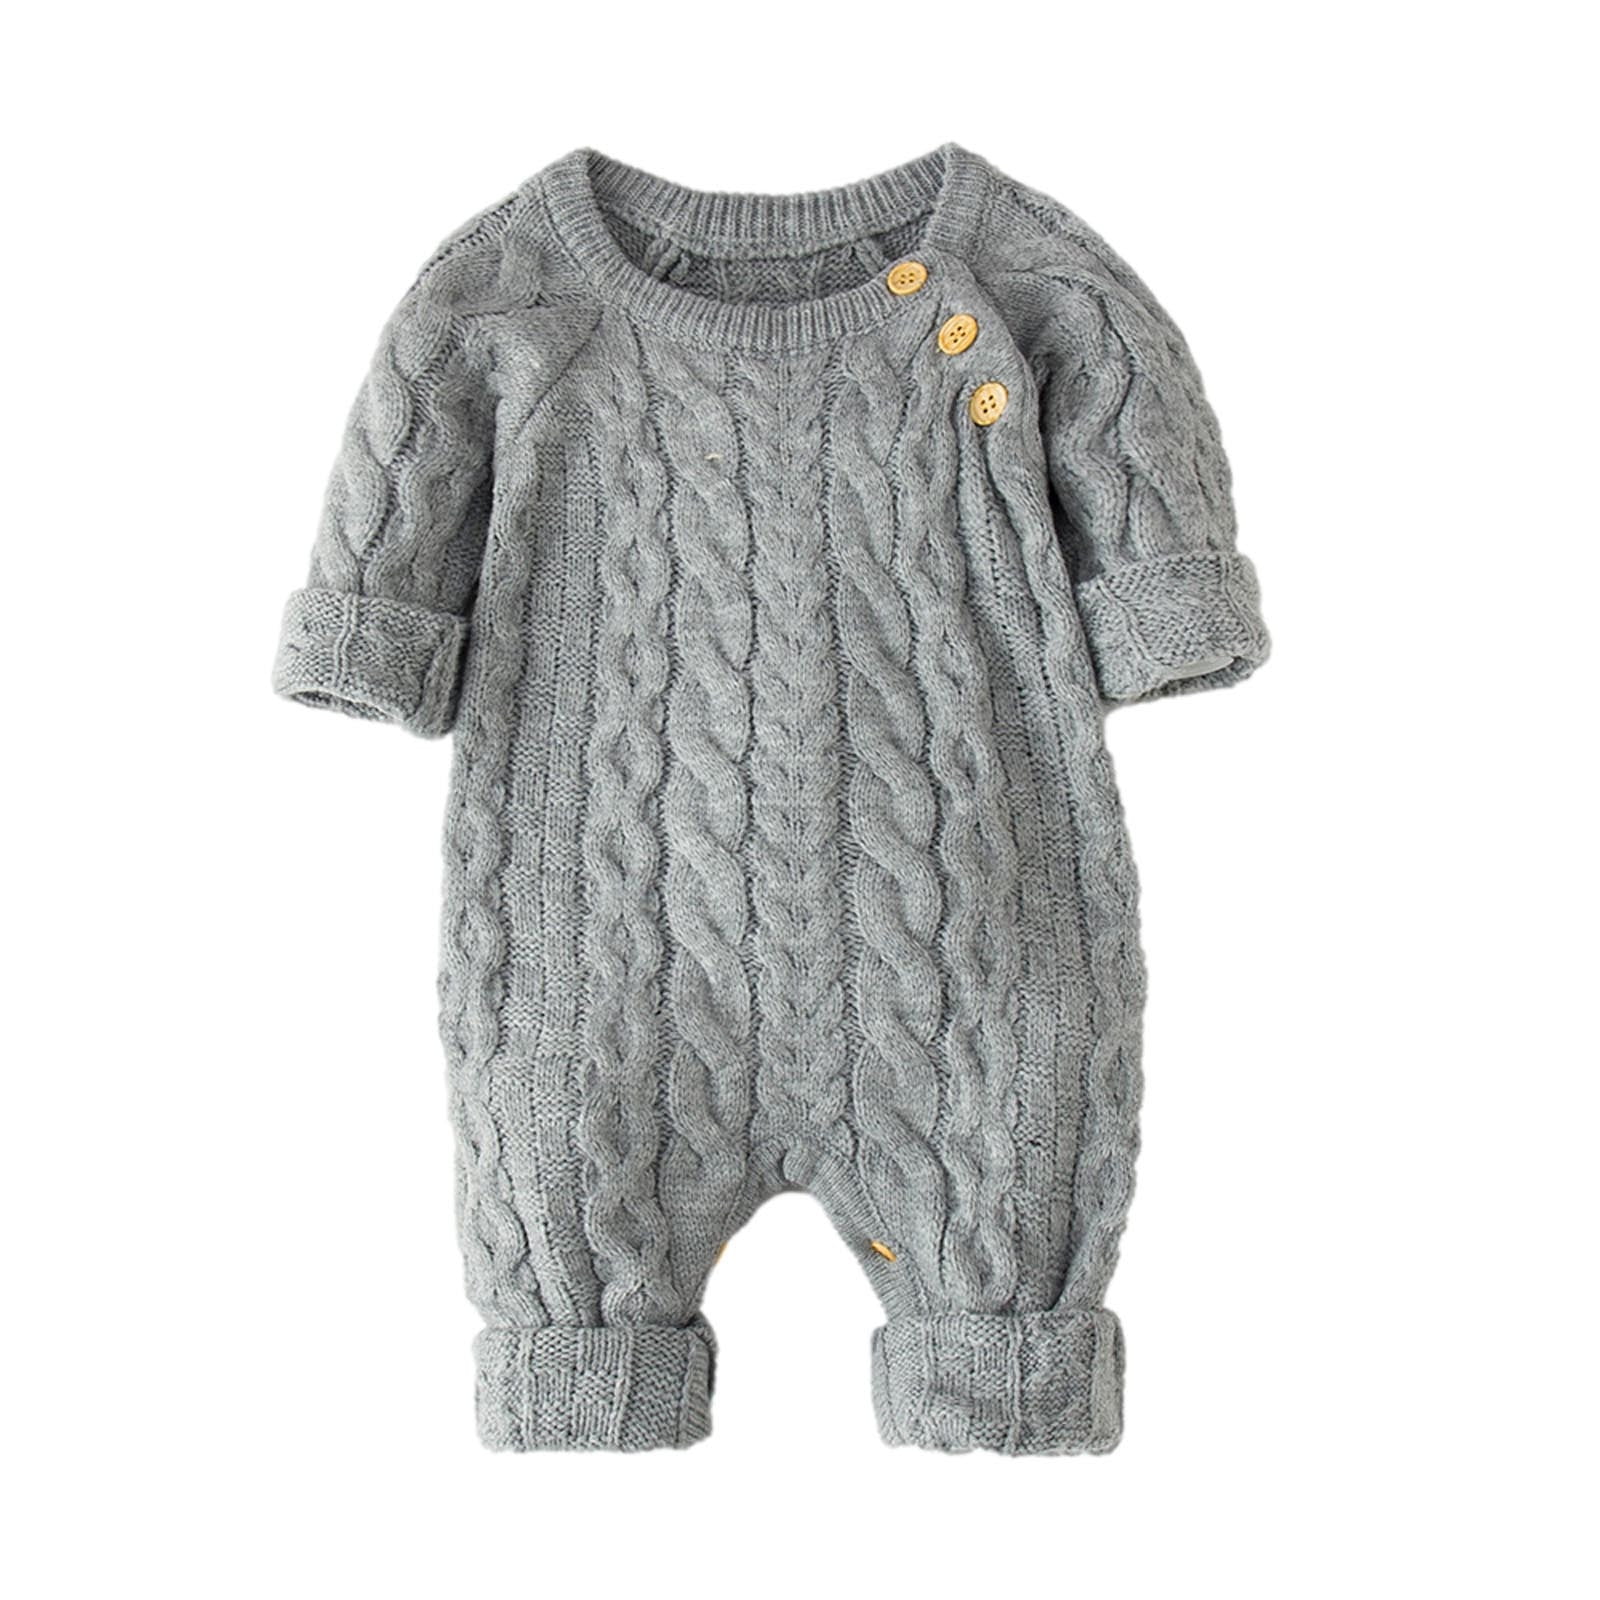 Newborn Baby Boy Girl Winter Button Sweater Knitted Jumpsuit Romper Warm Outfits 